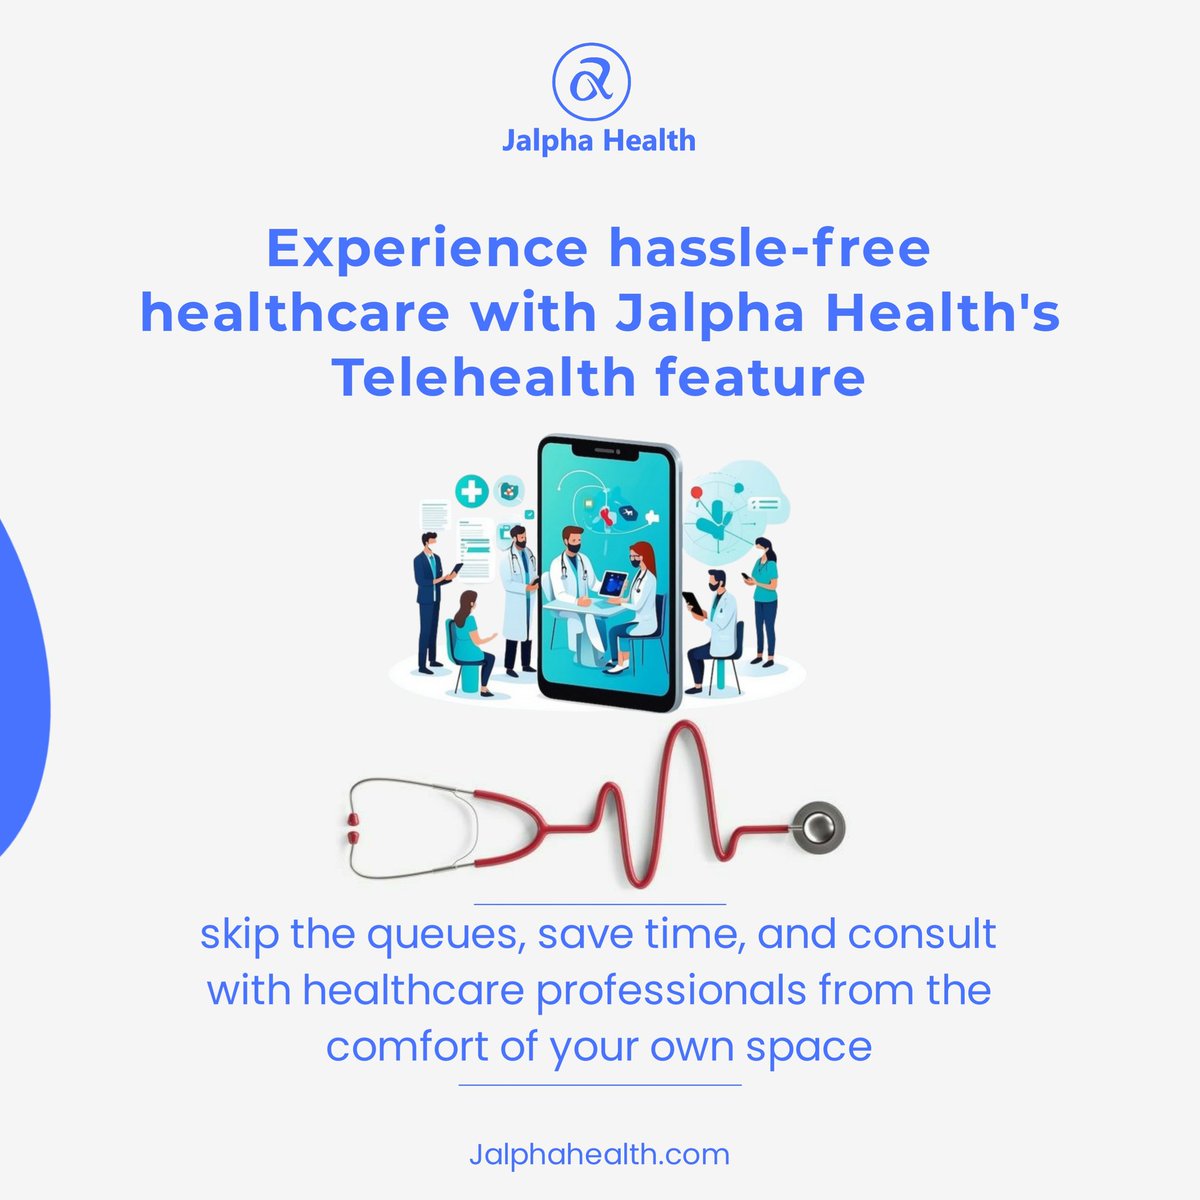 Experience hassle-free healthcare with Jalpha Health's Telehealth! Consult a doctor in minutes from anywhere, saving time and money.

Enjoy privacy and convenience with secure, cost-effective appointments.